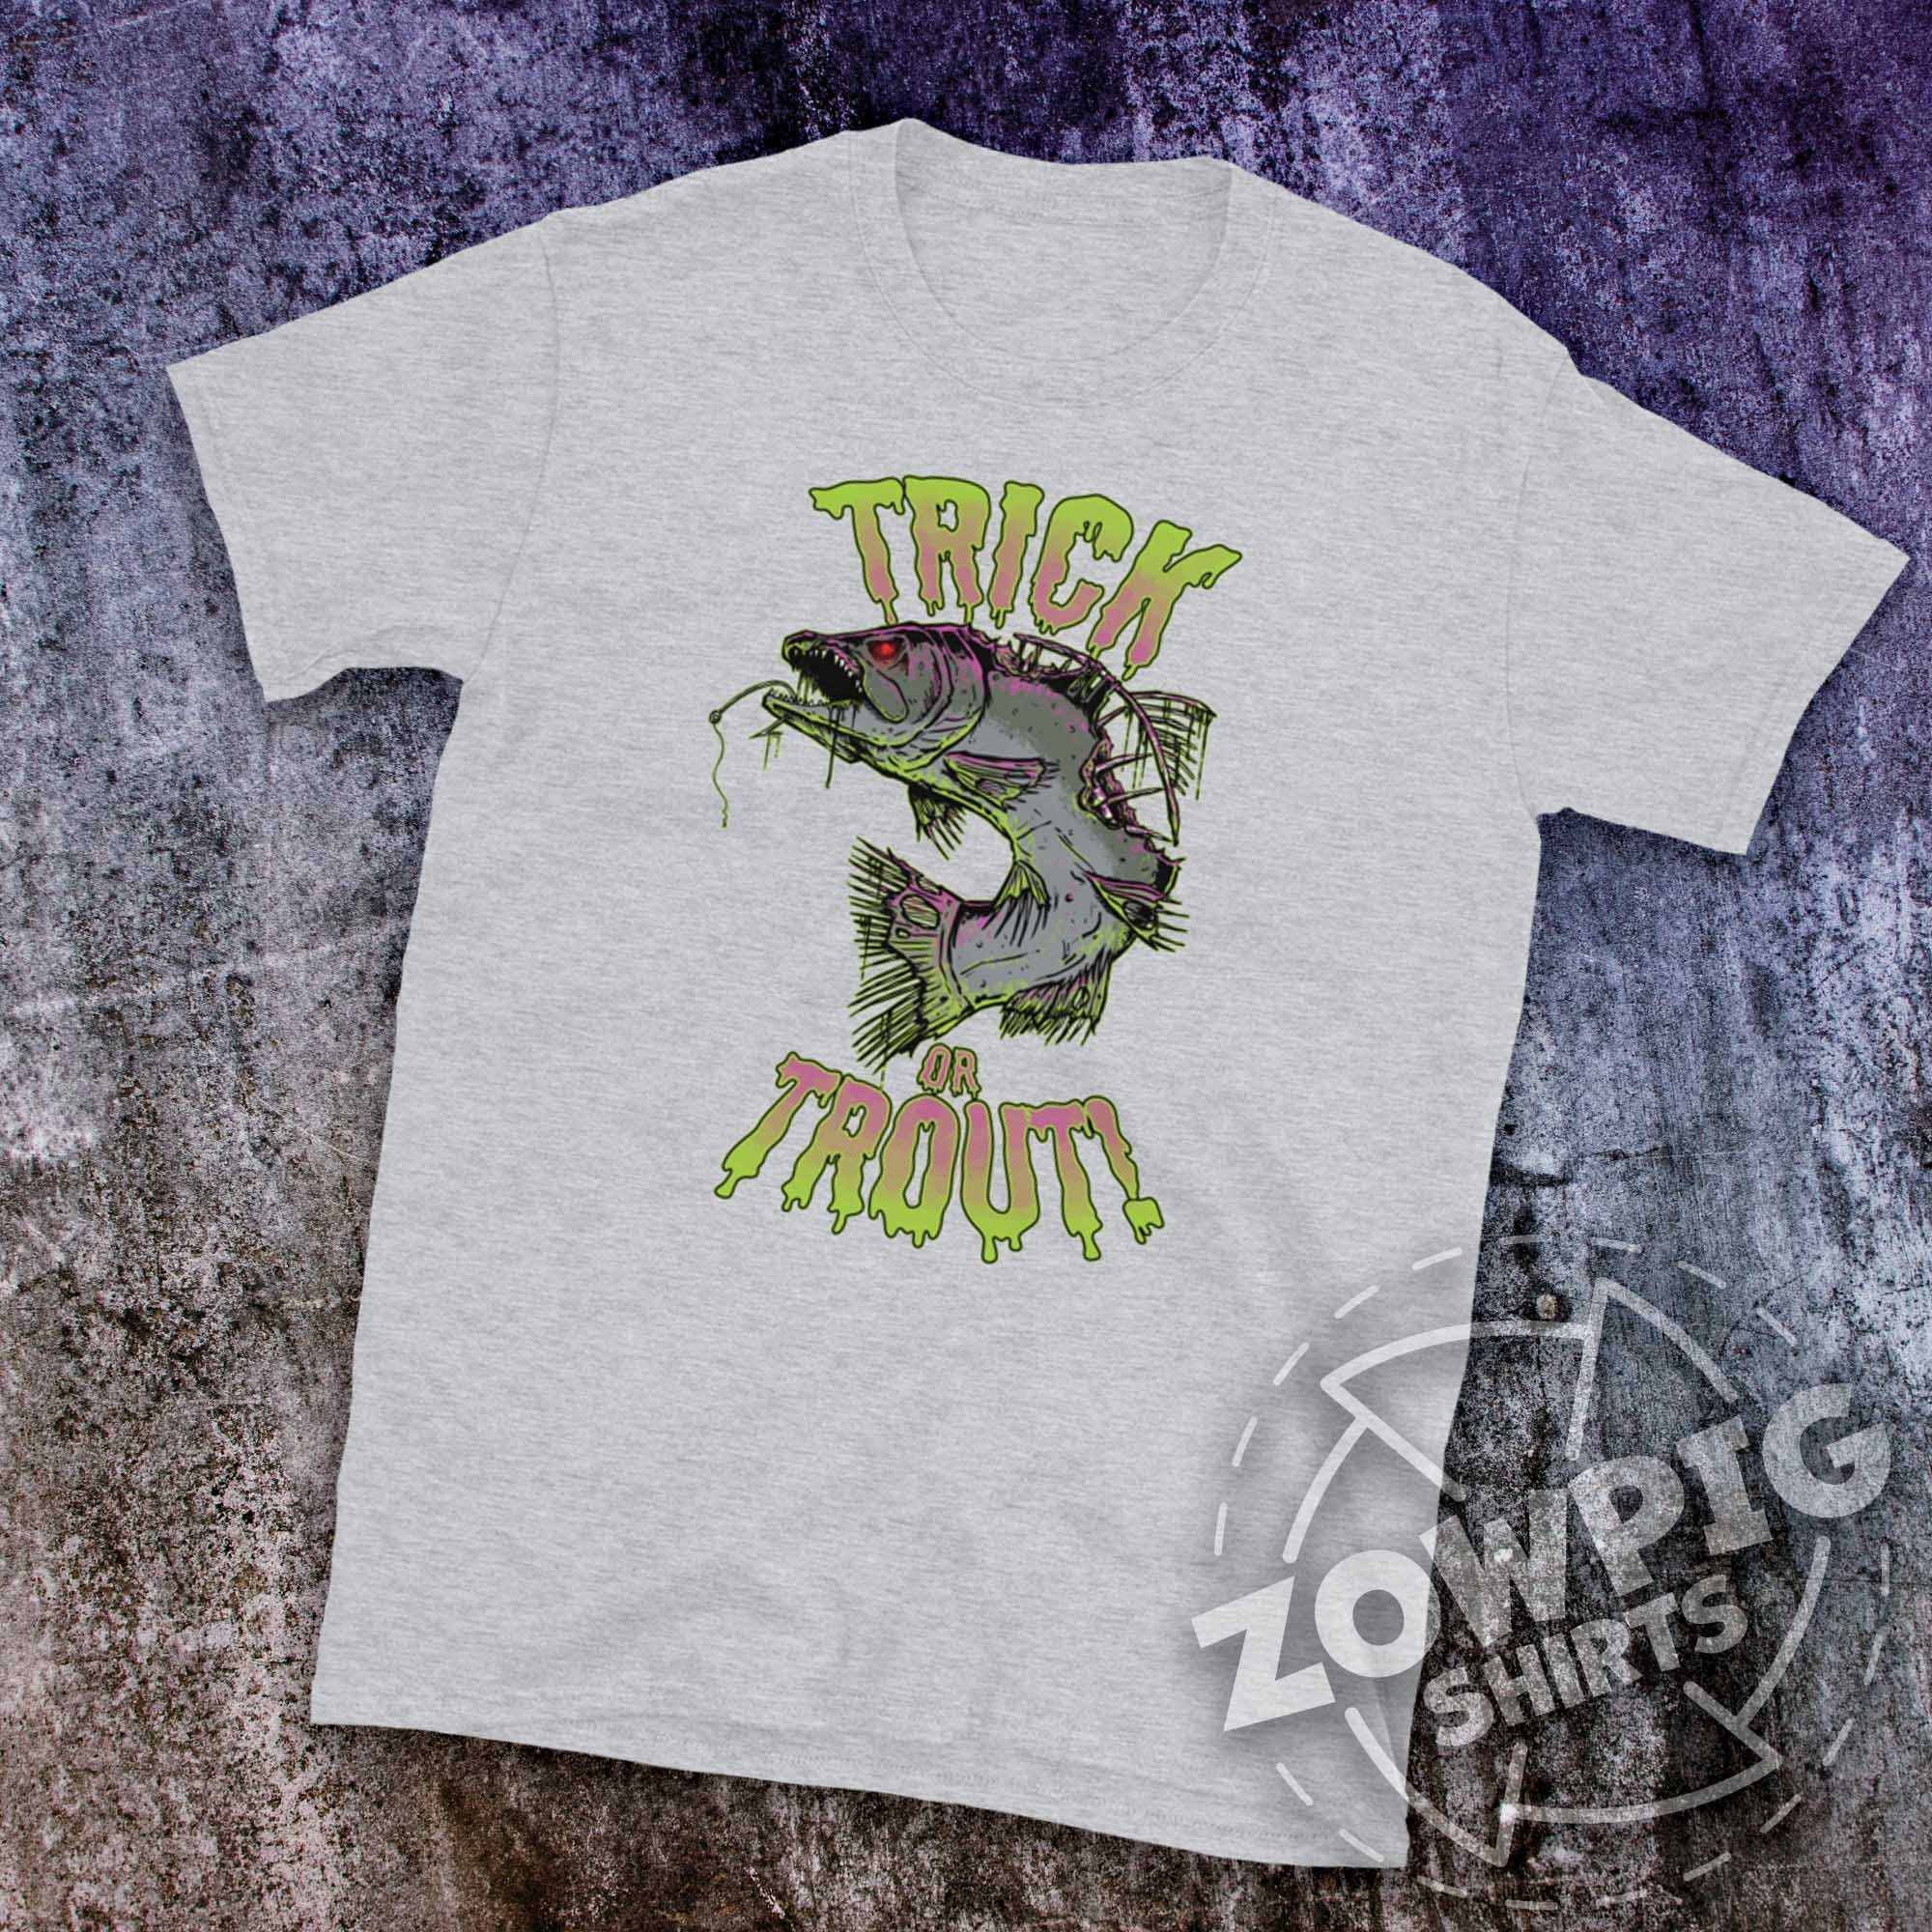 Discover Trick or Trout Creepy Funny Halloween Mens Fishing & Angling Shirt, Halloween Gift for Fisherman, Funny Zombie Trout Fishing and Angling Tee